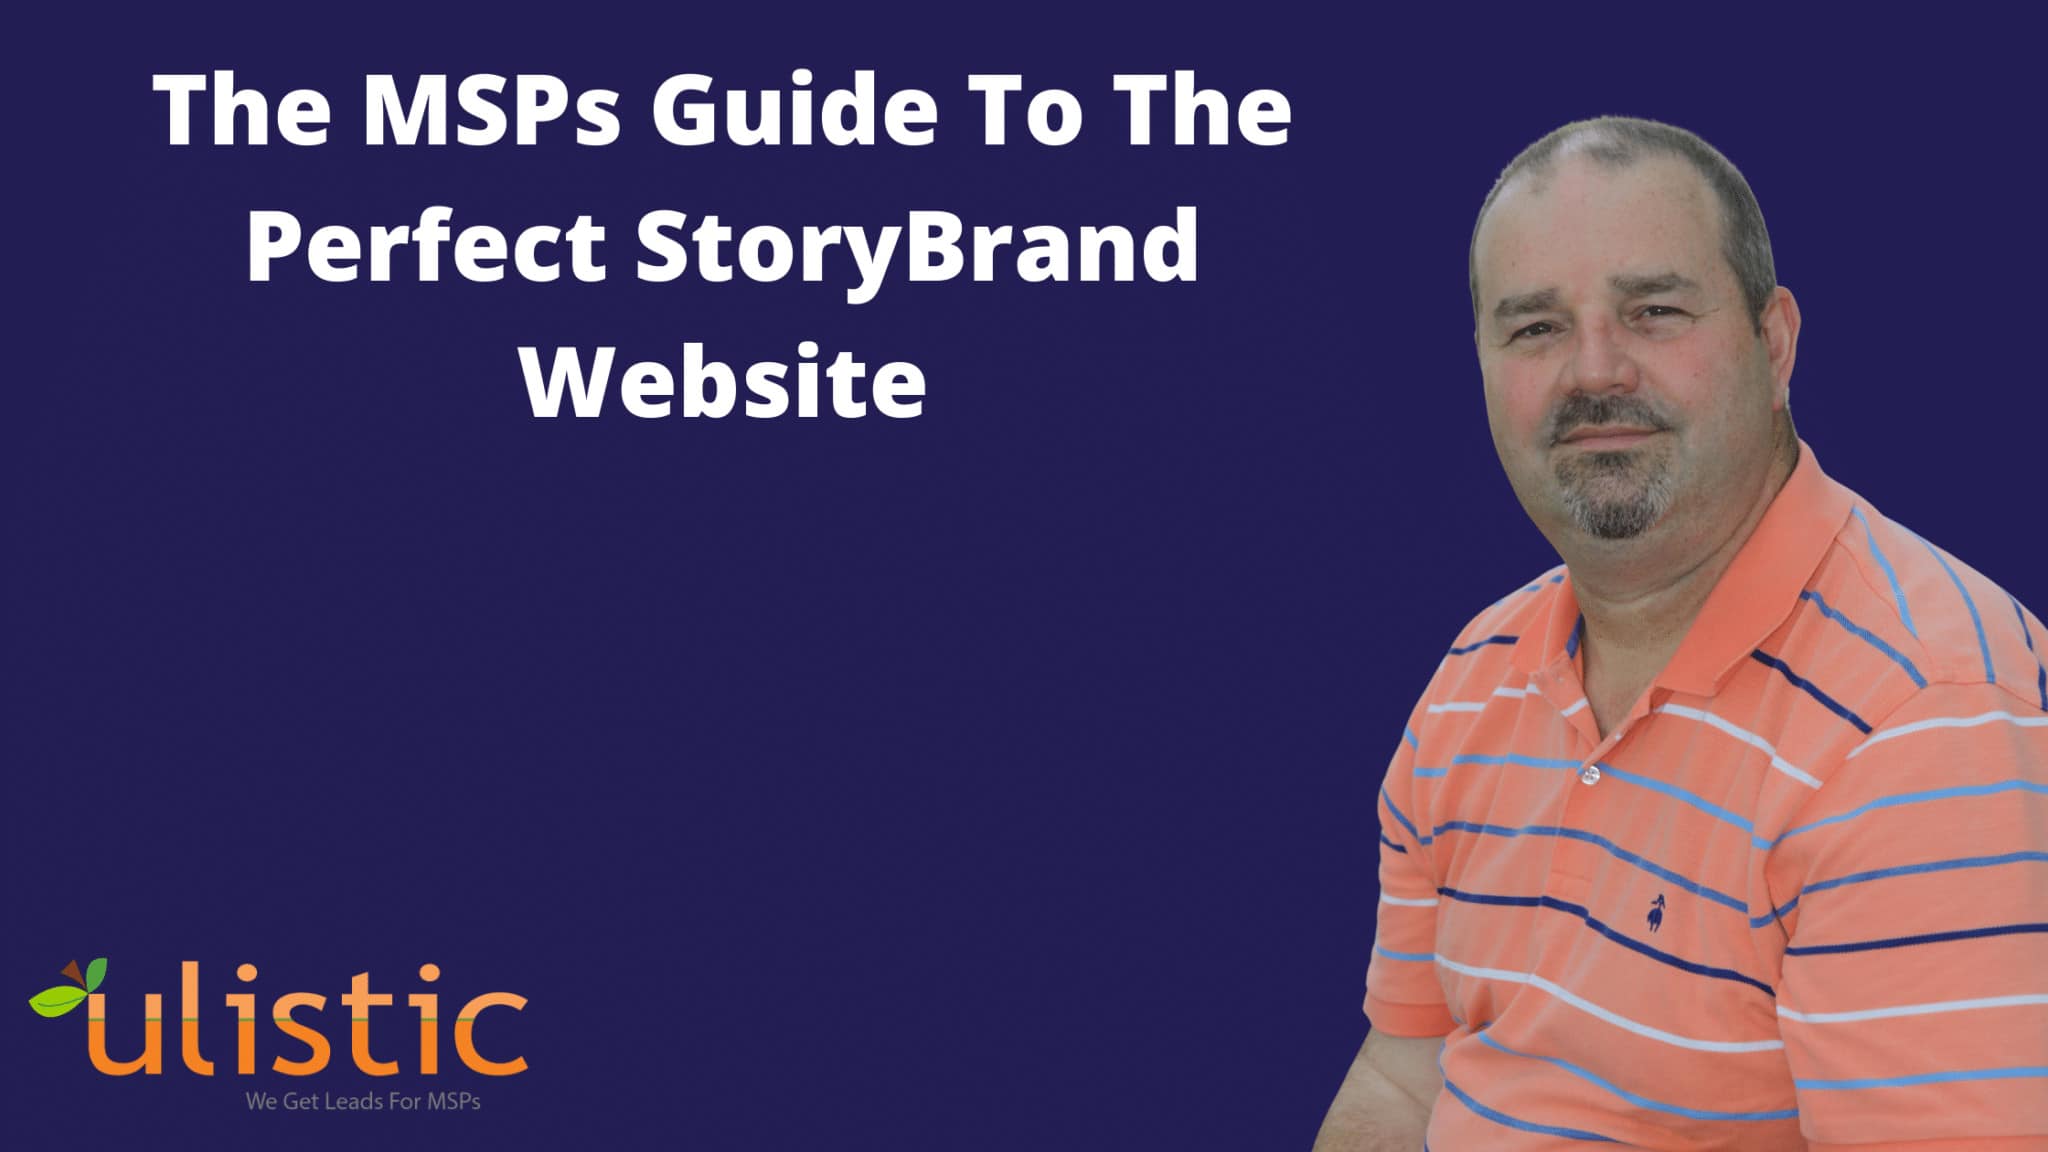 The MSPs Guide To The Perfect StoryBrand Website